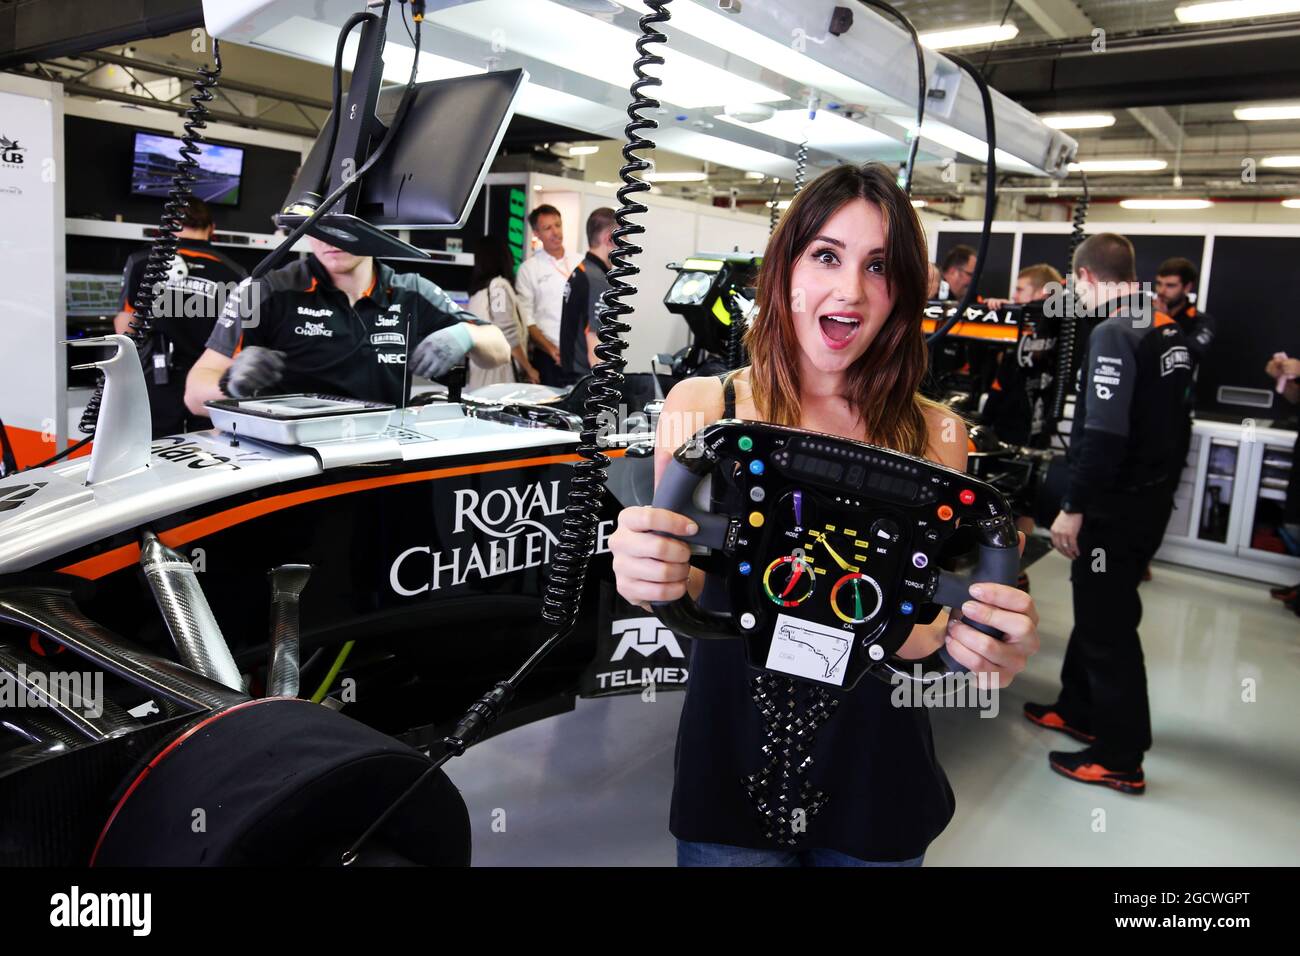 Dulce Maria (MEX) Singer and Actress with the Sahara Force India F1 Team. Mexican Grand Prix, Saturday 31st October 2015. Mexico City, Mexico. Stock Photo